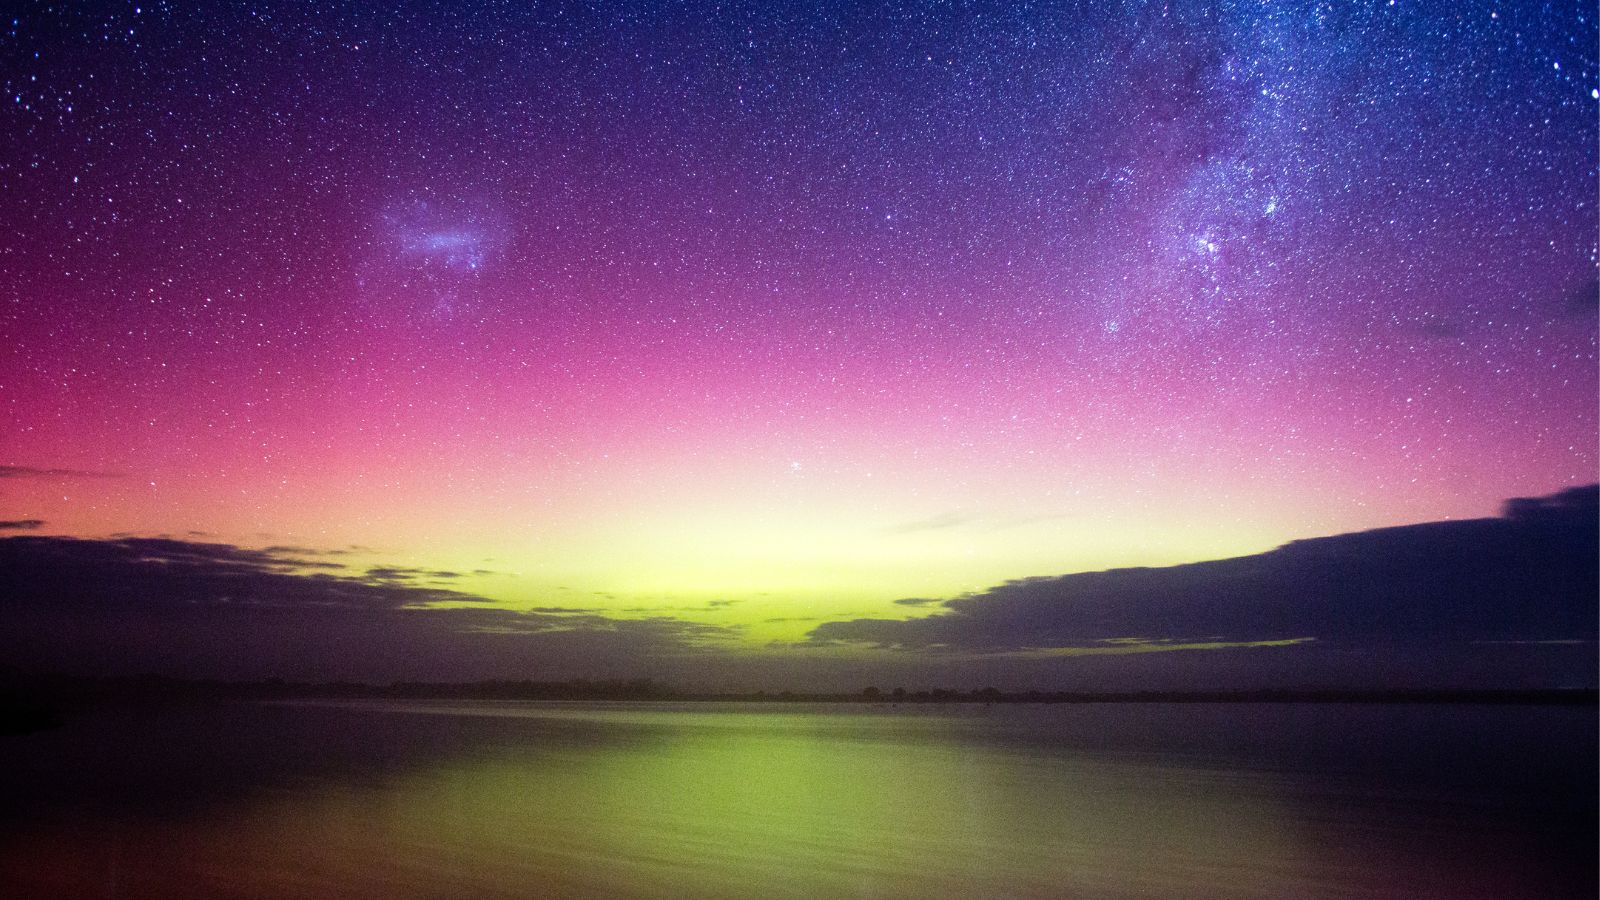 Night time landscape with the sky lit up in shades of pink and purple from the Aurora Australis